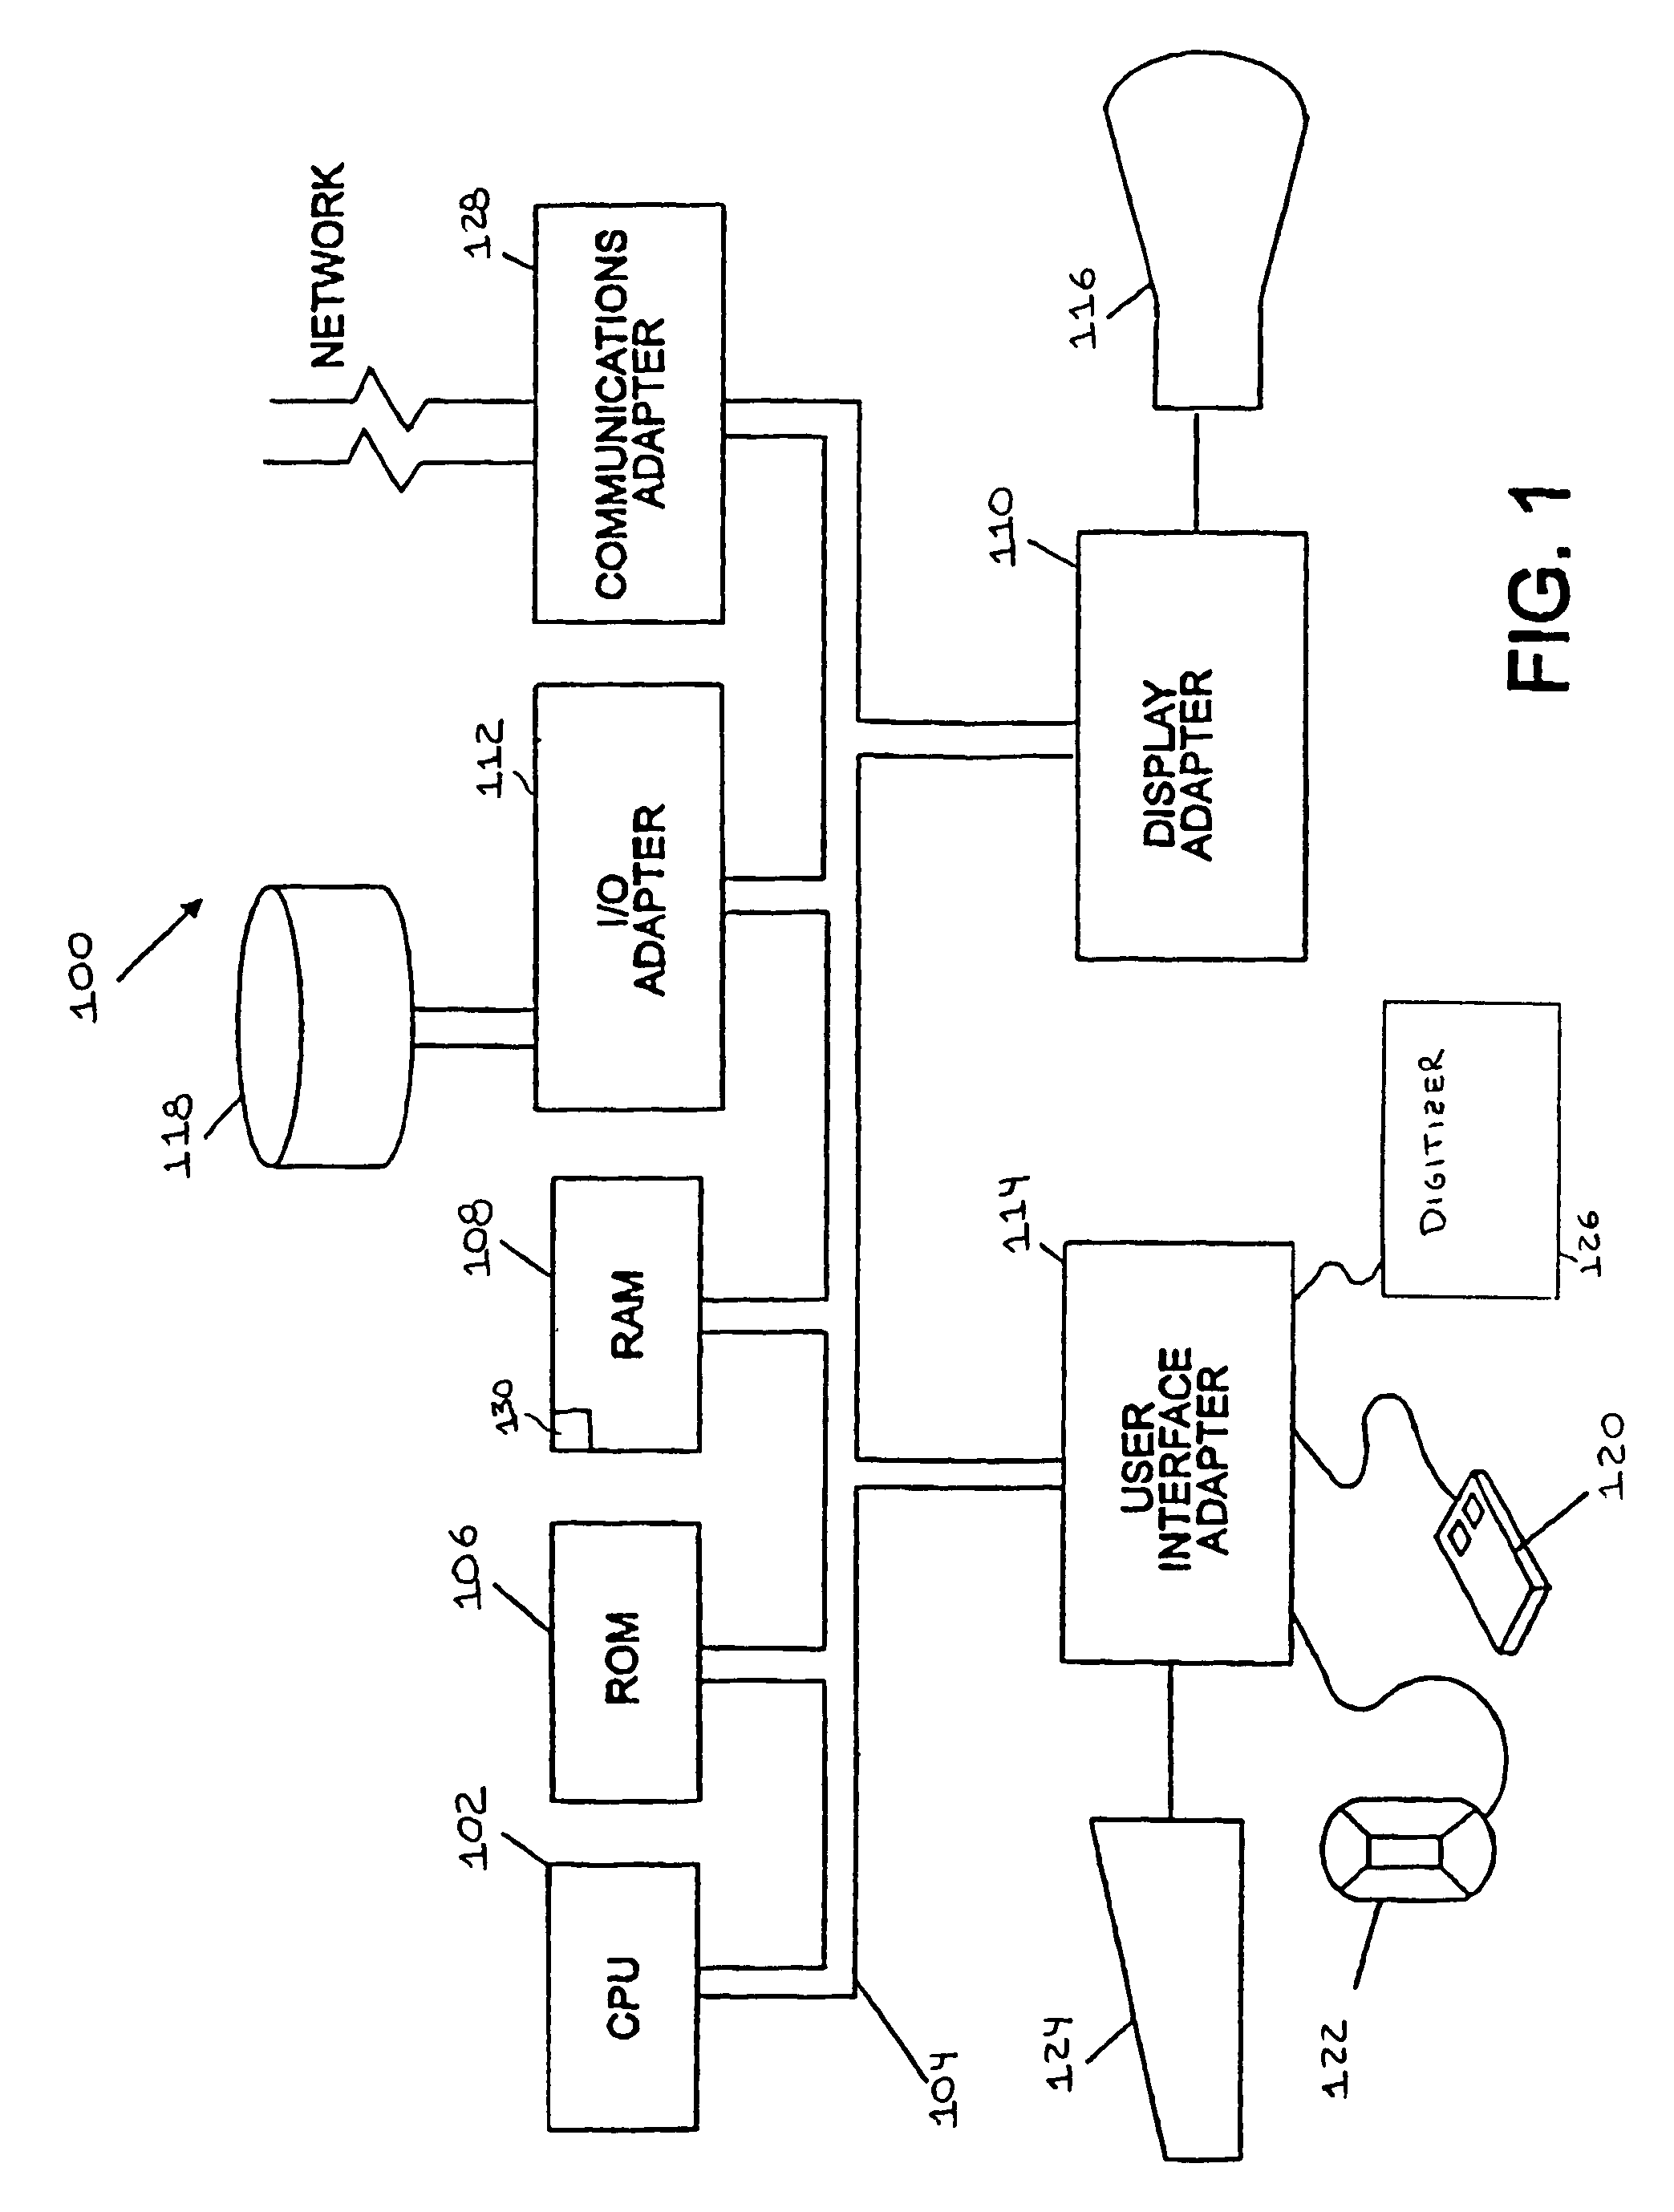 Computer-aided diagnosis method for aiding diagnosis of three dimensional digital image data